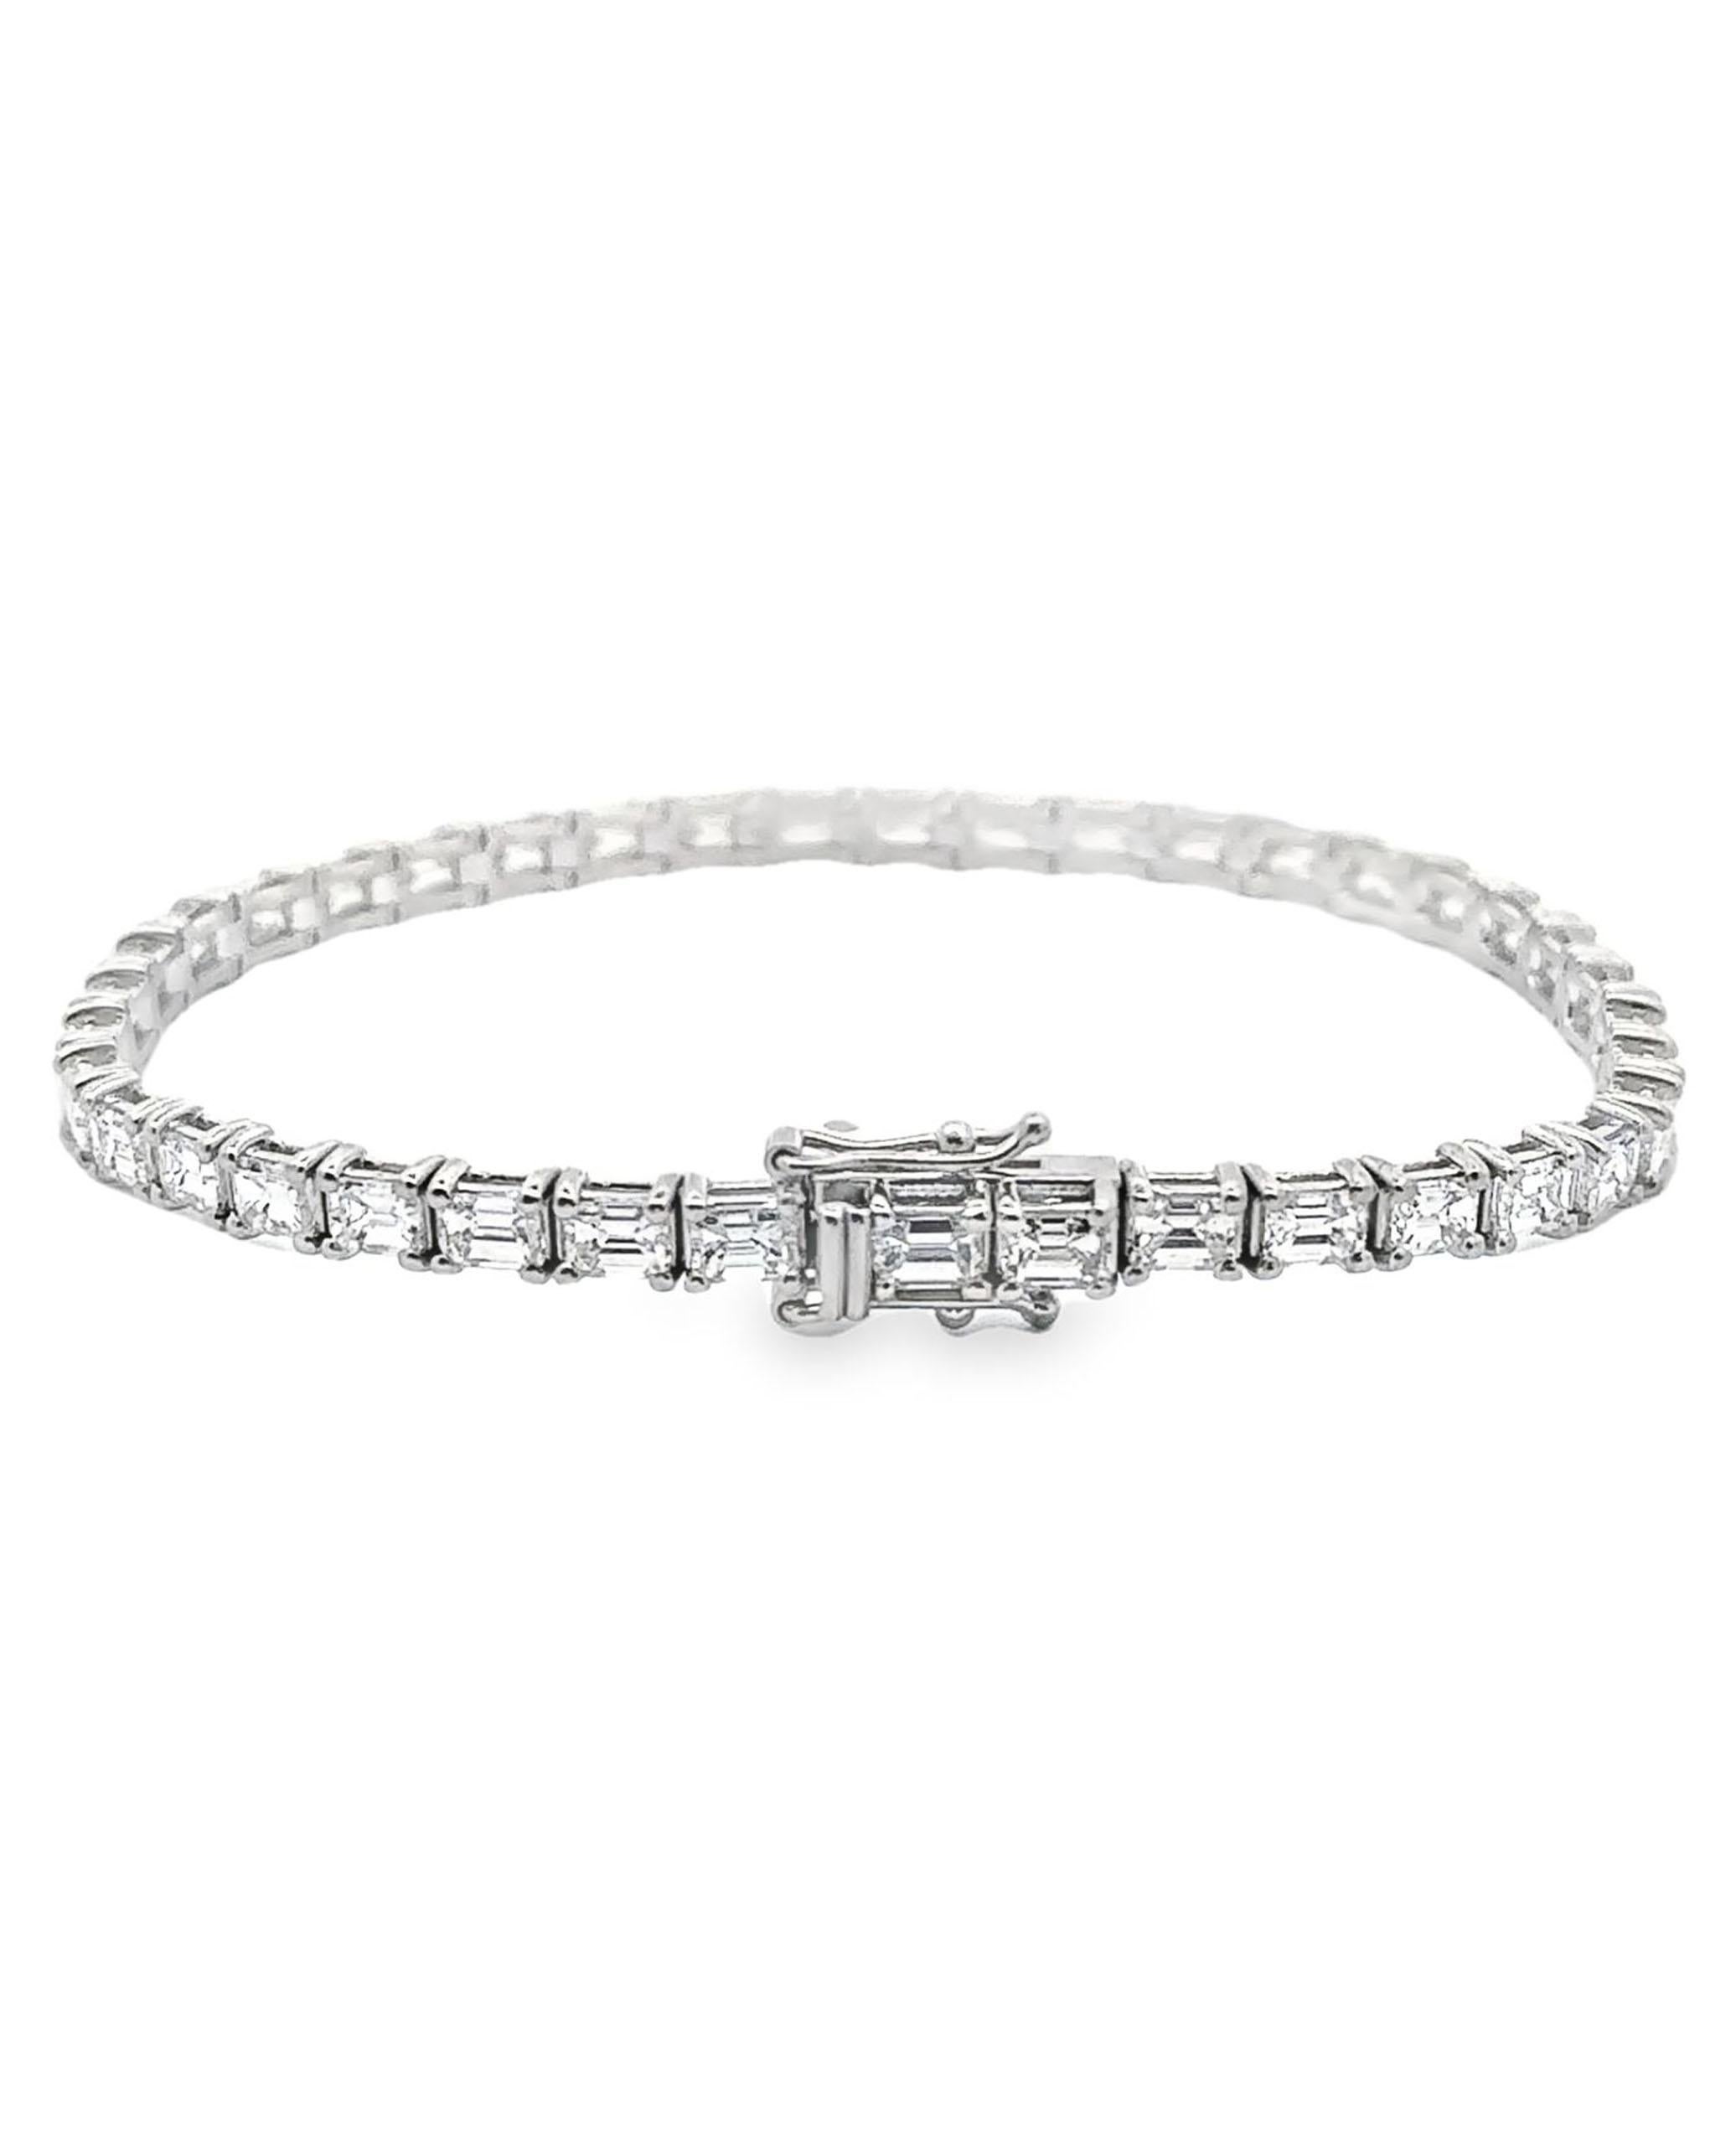 14K white gold line bracelet furnished with 39 emerald-cut diamonds weighing 8.15 carats total. 

* Diamonds are G/H color, VS2 clarity.
* 7 inches long.
* Double figure 8 safety lock.